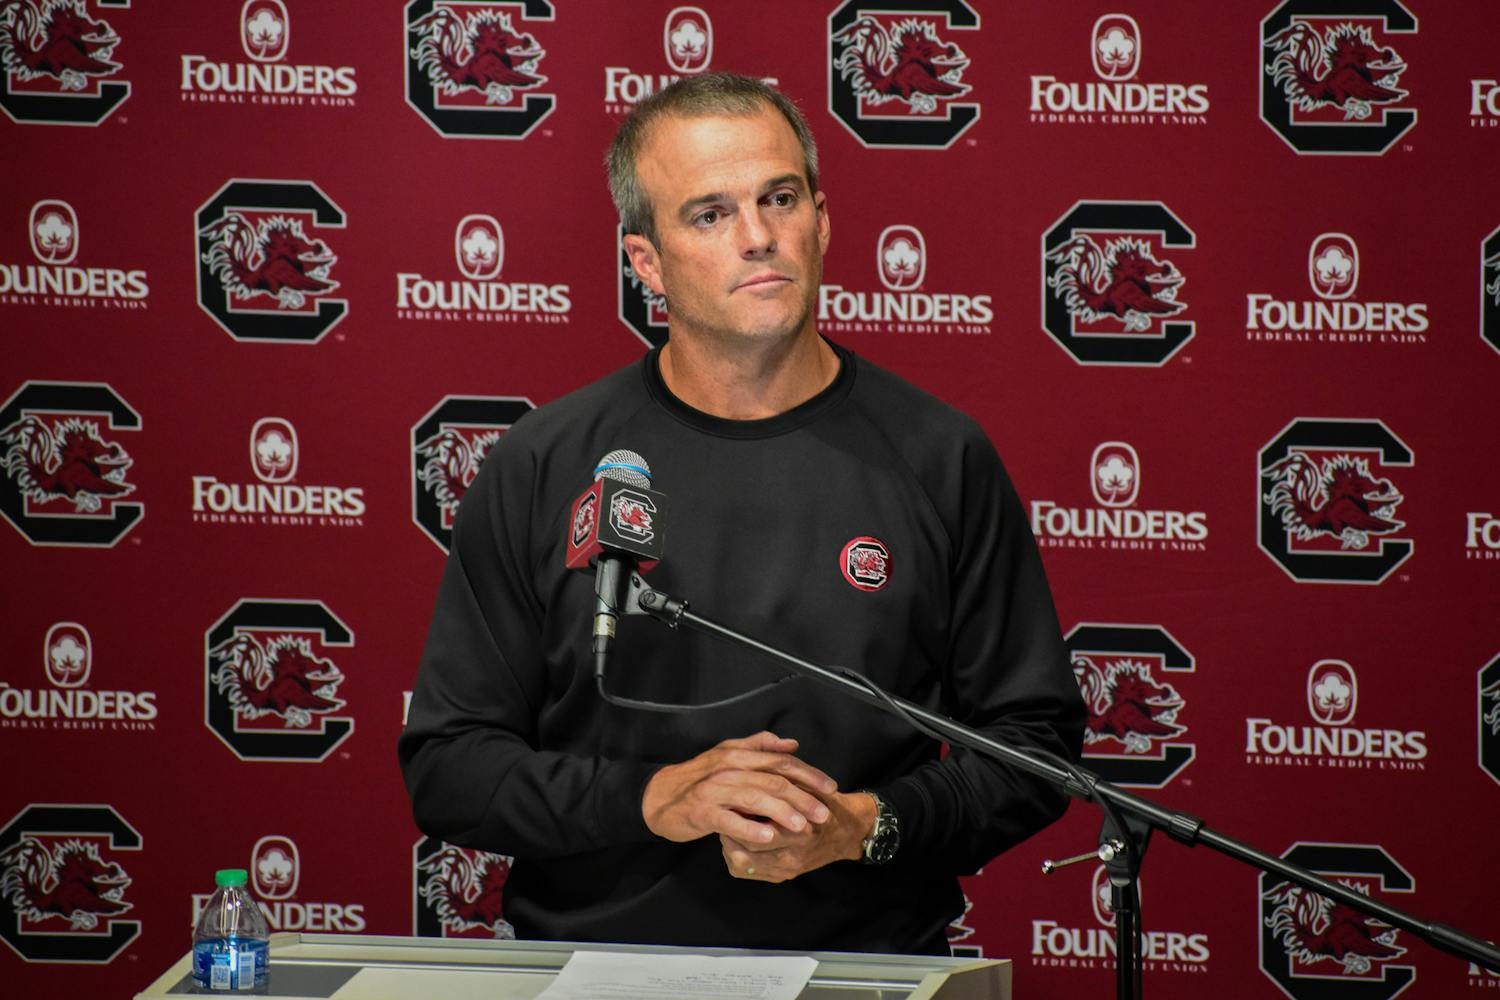 ɫɫƵ football head coach Shane Beamer addresses the media at the ɫɫƵ Football Operations Center on Oct. 10, 2023. Beamer discussed the team's negative plays that contributed to a 41-20 loss to Tennessee before the team's bye week.